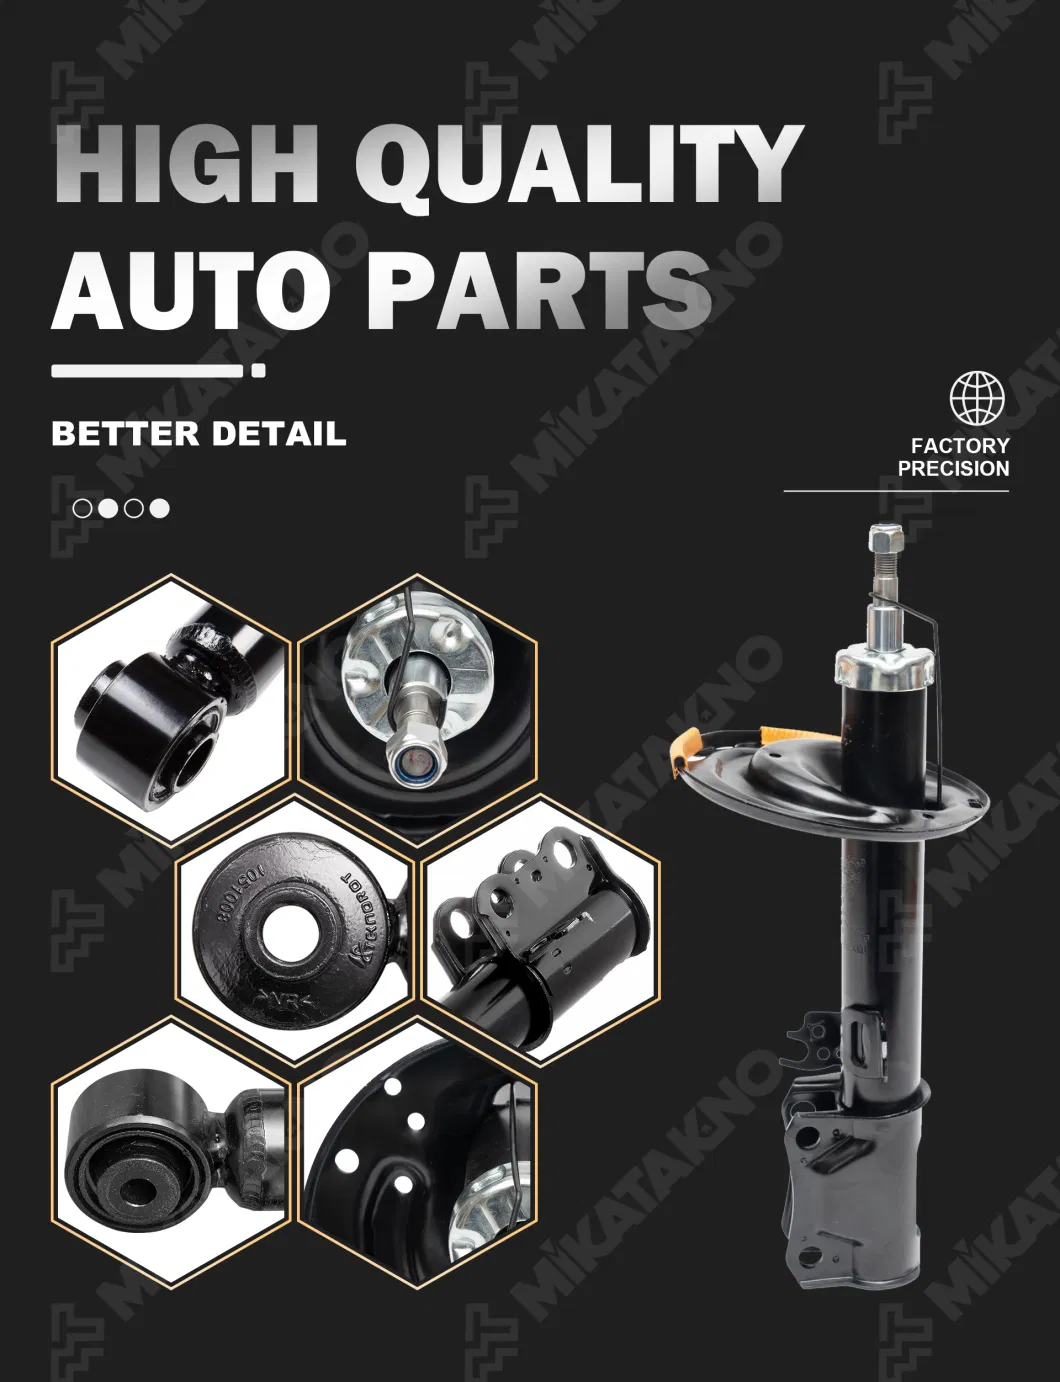 Mikatakno Absorber Shocks for All Types of Cars in High Quality and Factory Prices